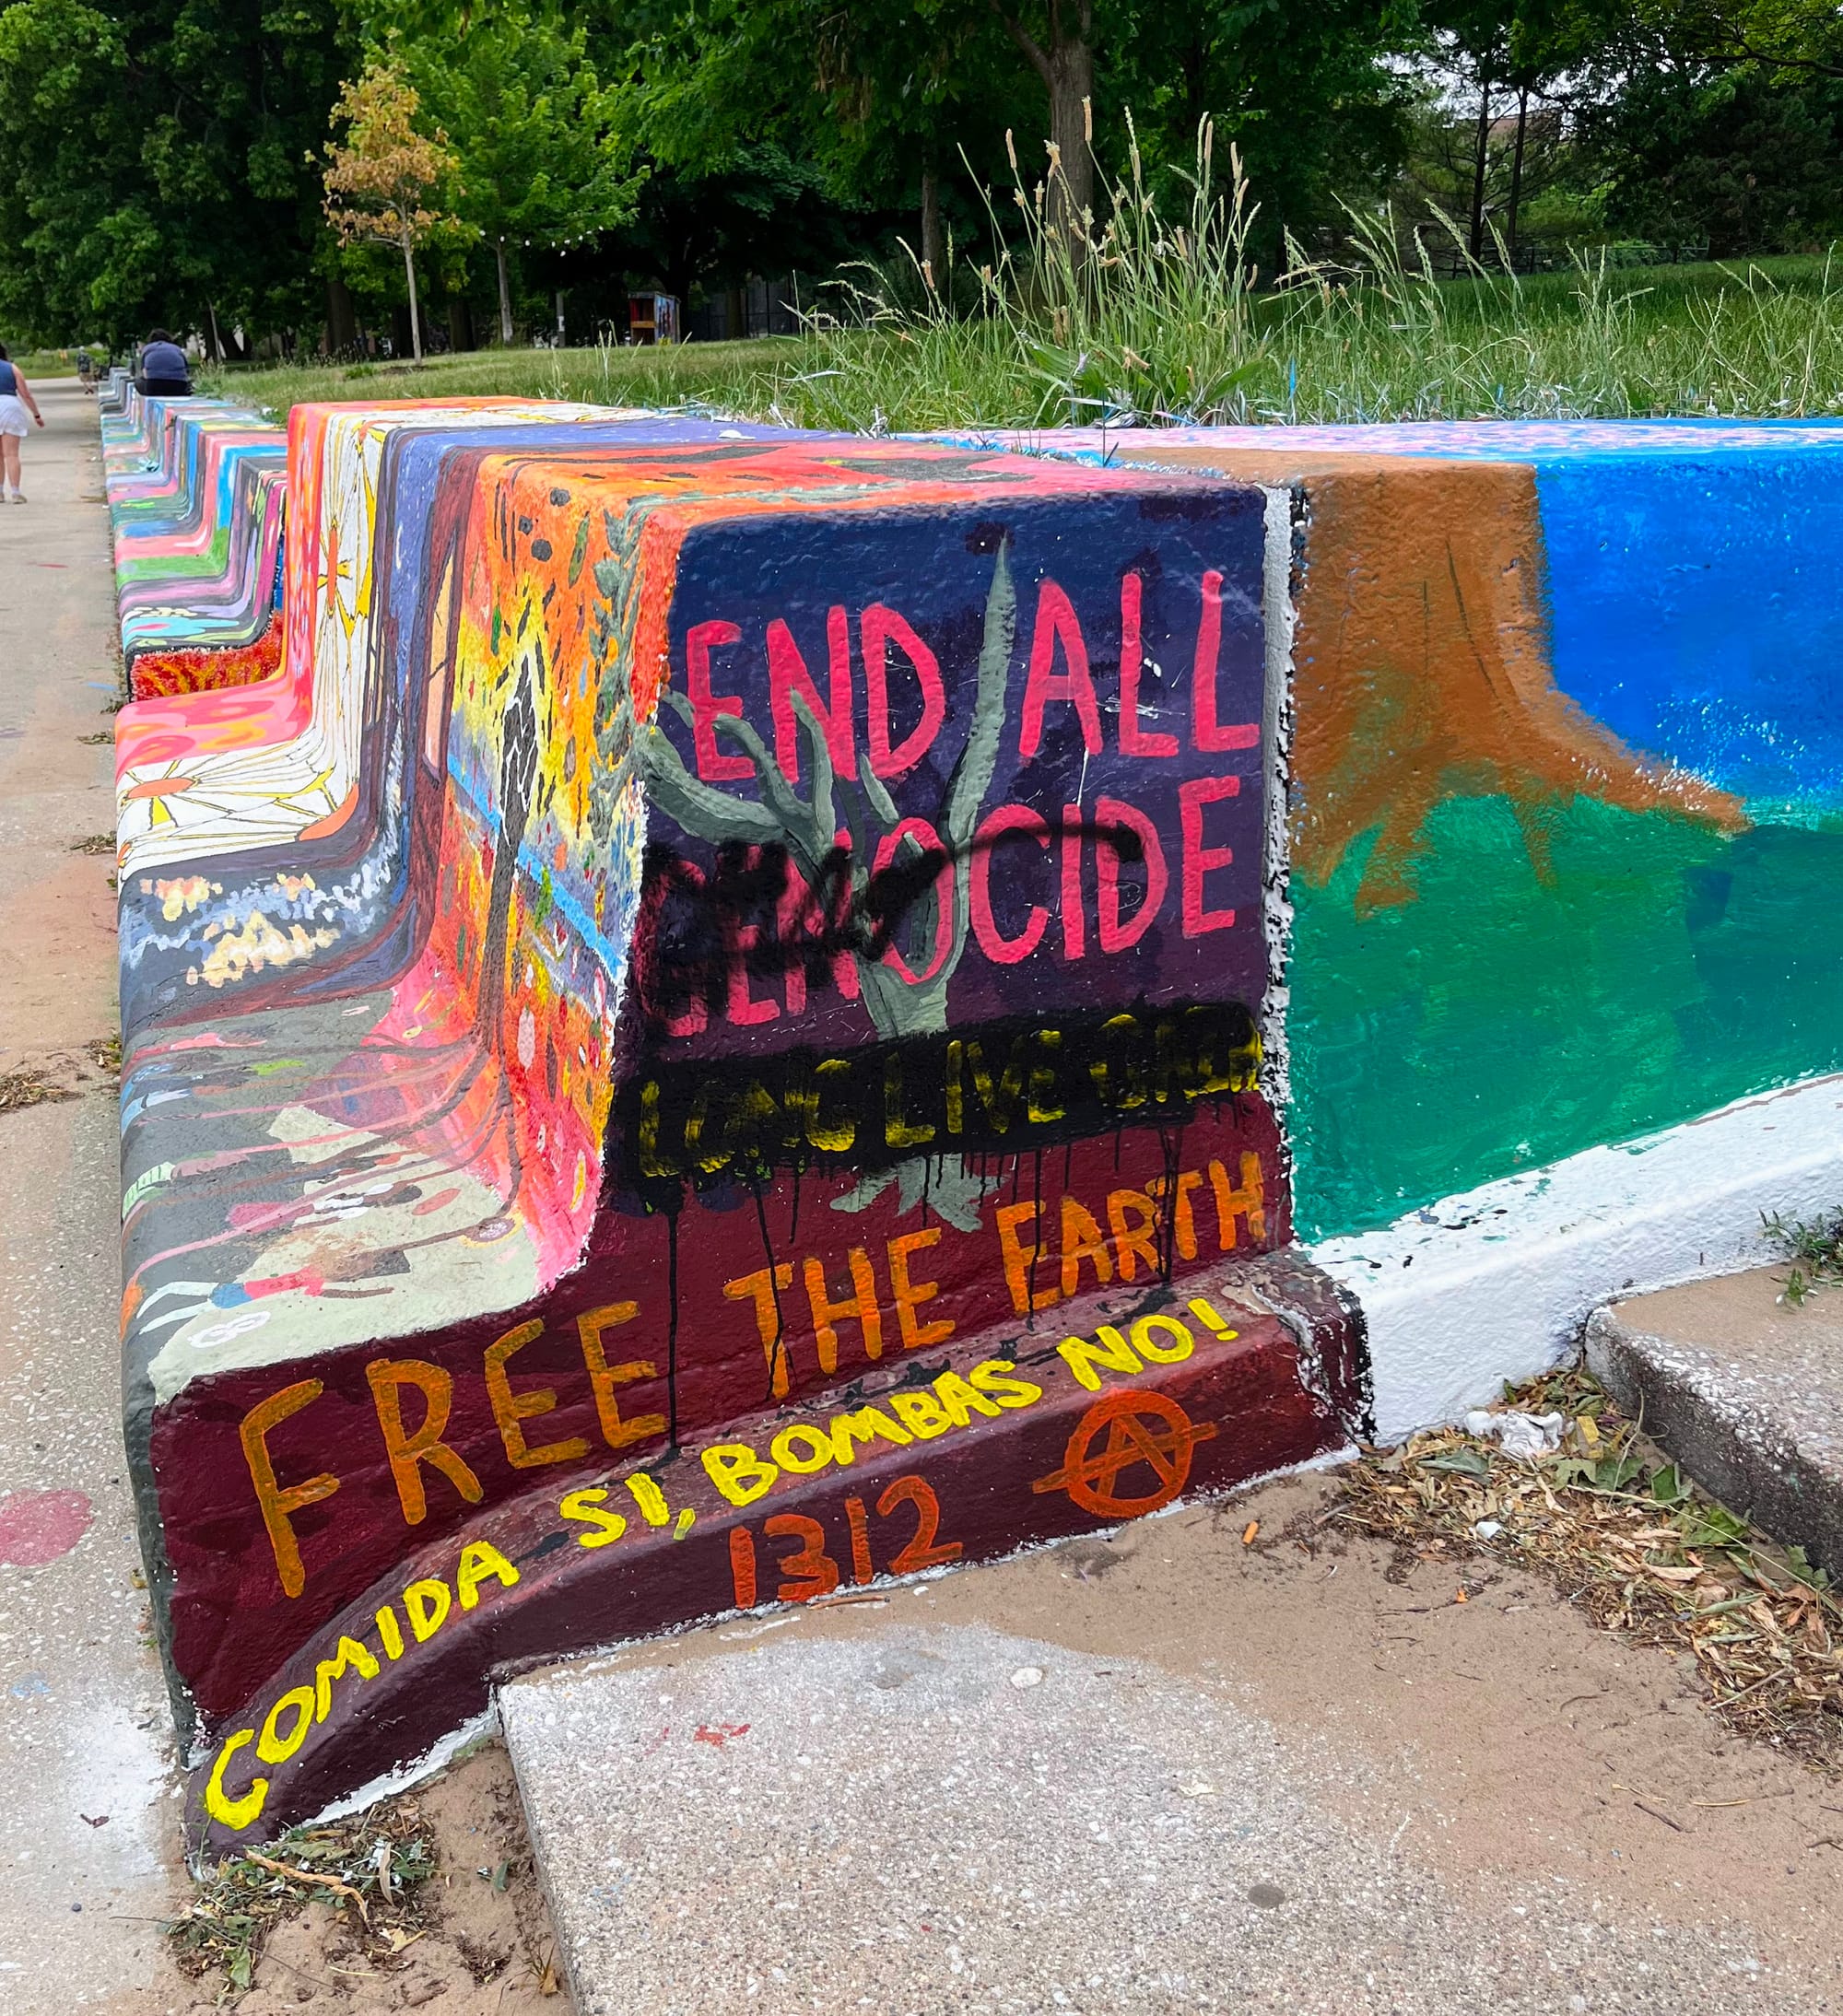 A mural that includes the words "end all genocide" is smeared with black paint.